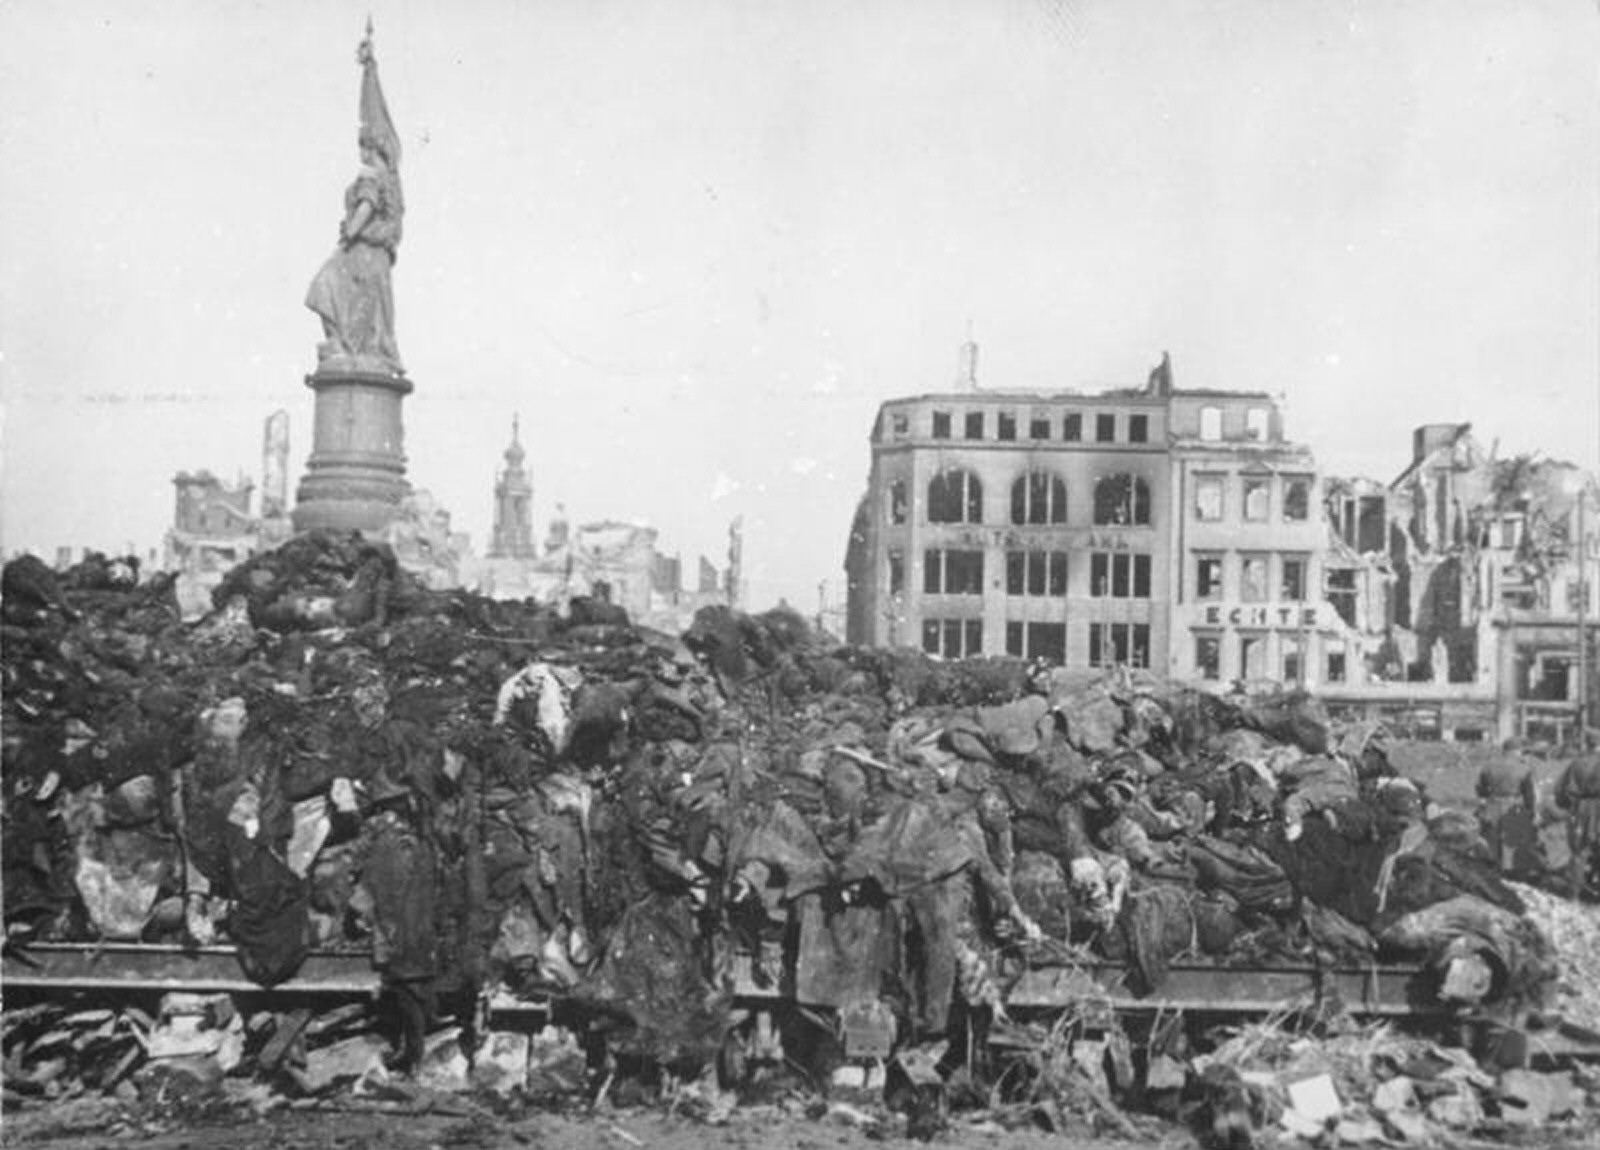 A+pile+of+bodies+awaits+cremation+after+the+firebombing+of+Dresden,+February+1945.jpg